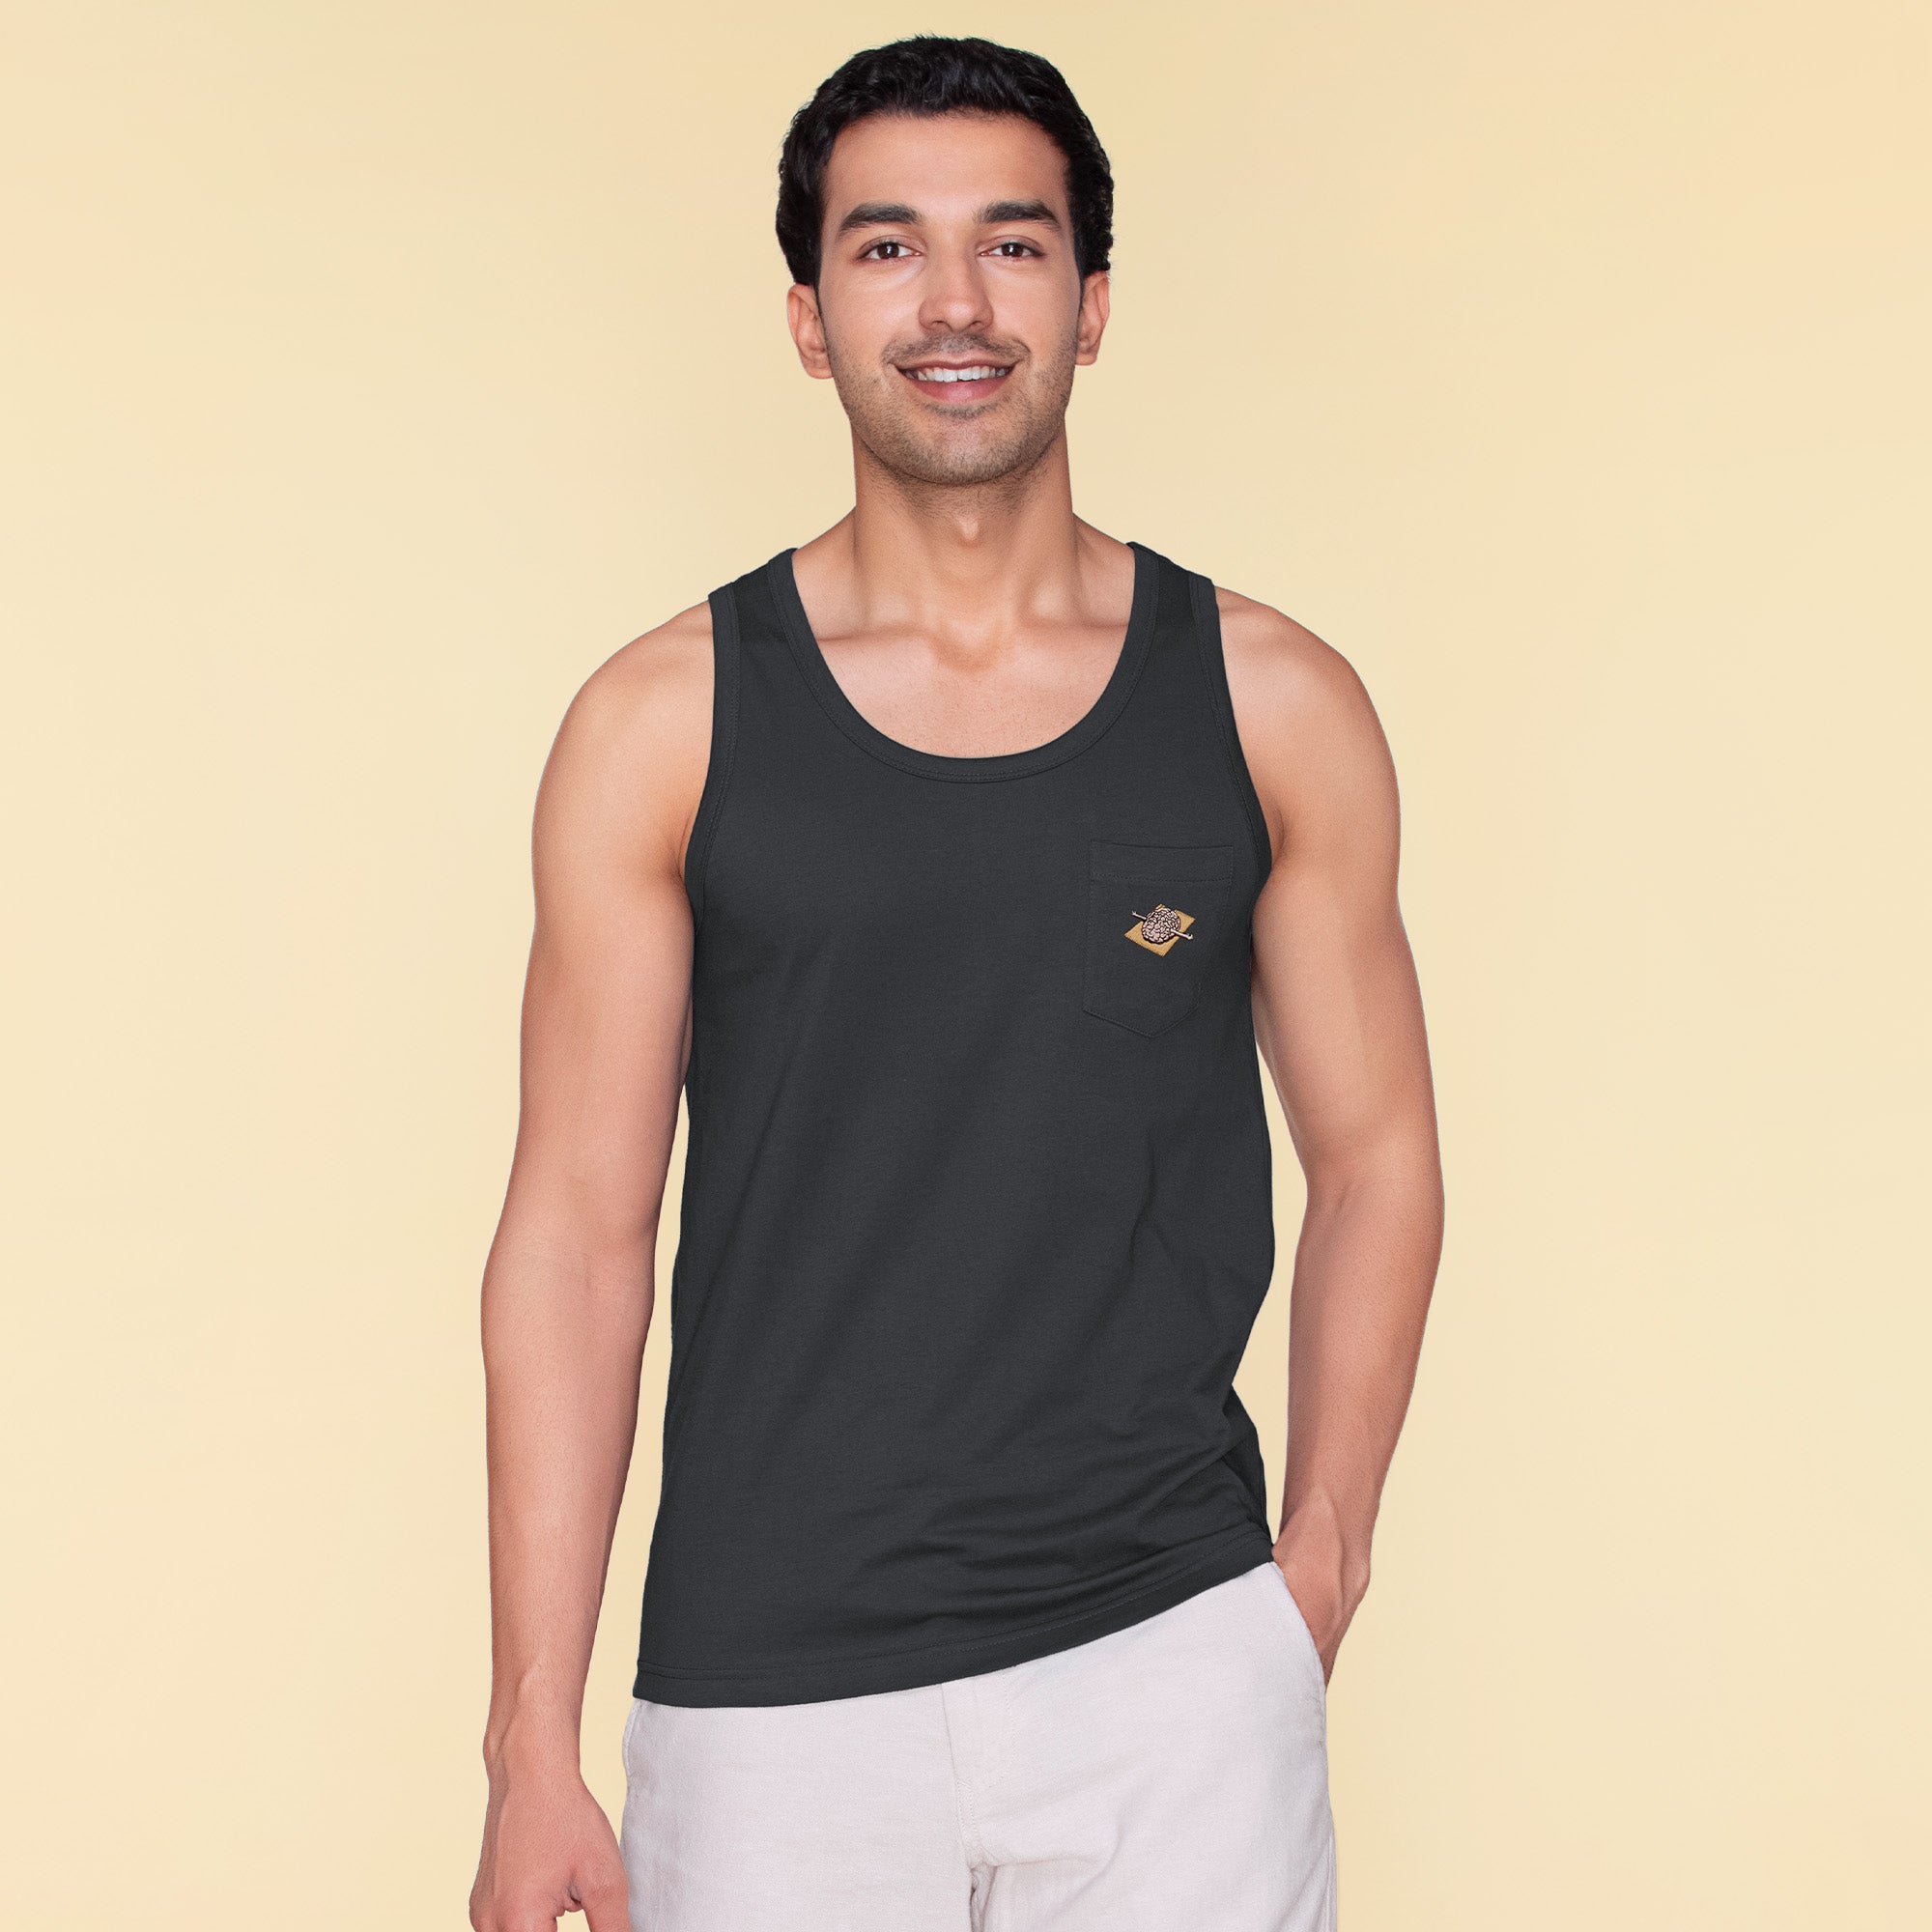 Mens Cotton Mesh Fitted Tank Top by NDS Wear - Clearance - ABC Underwear